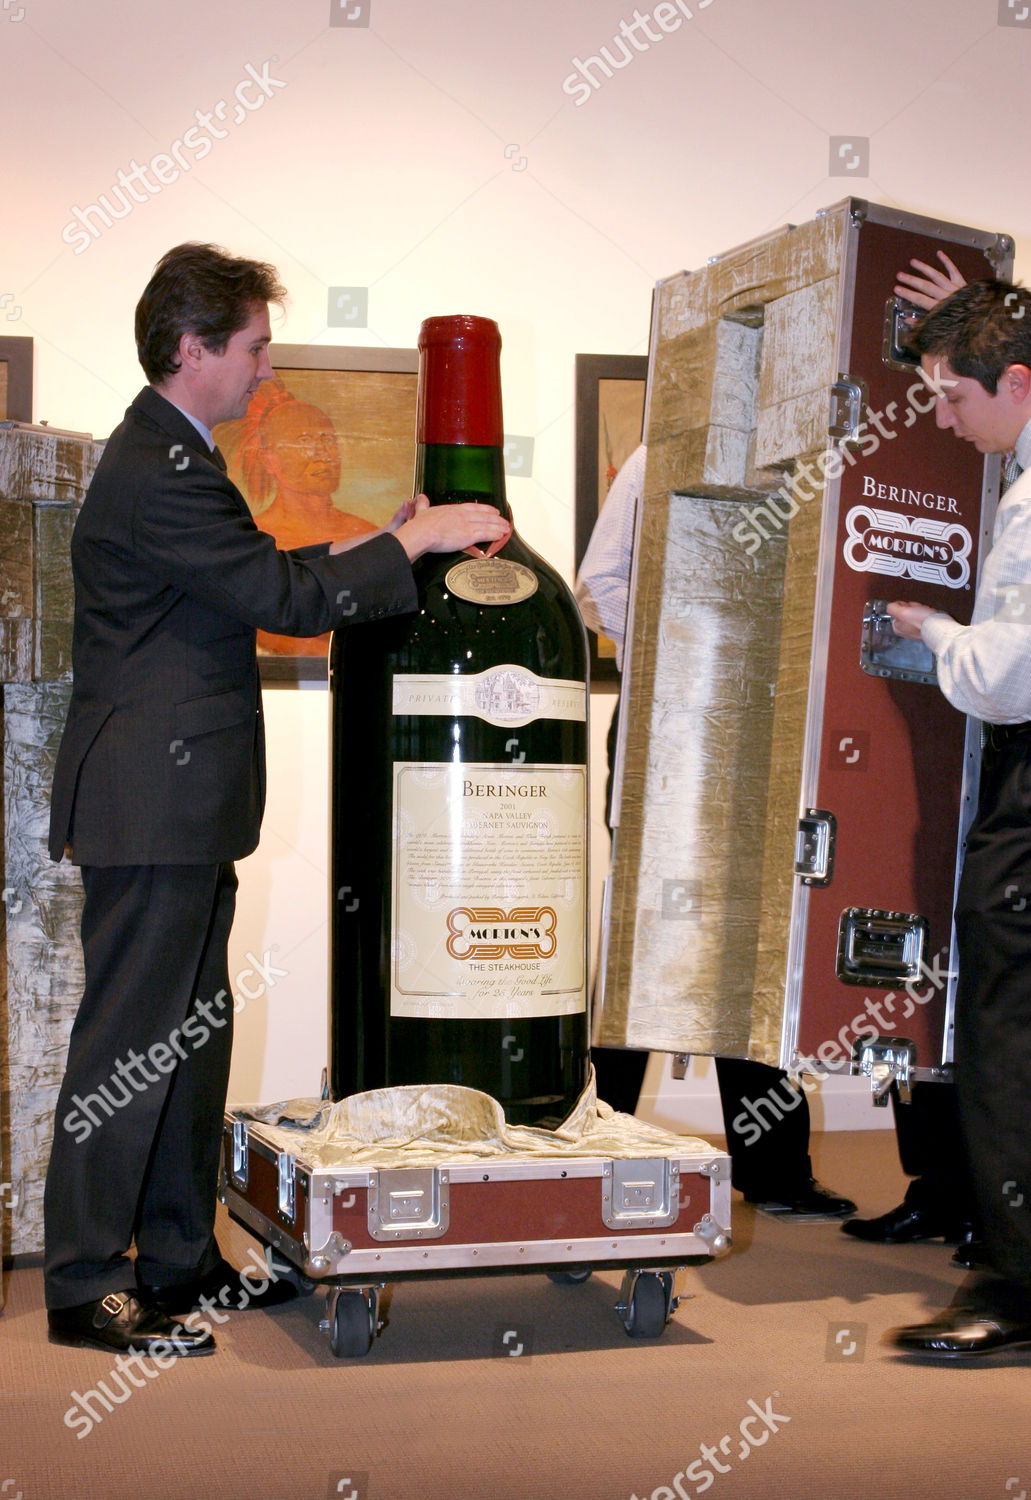 the-worlds-largest-bottle-of-wine-new-york-america-shutterstock-editorial-503816a.jpg